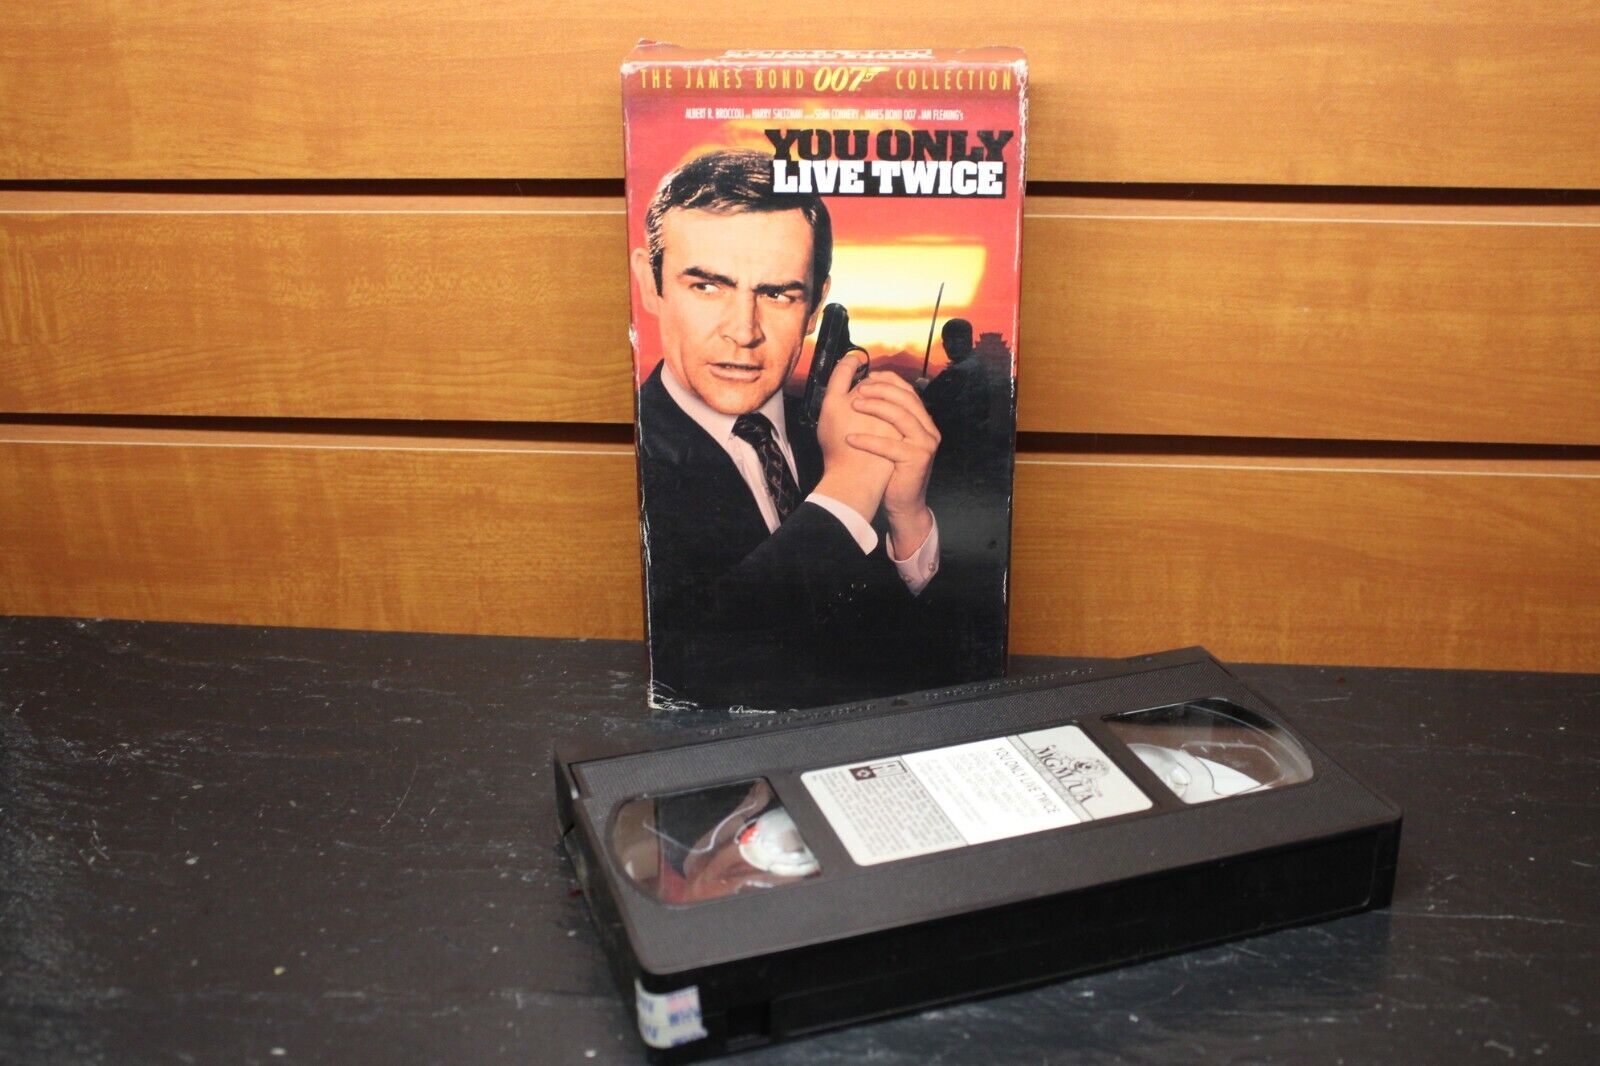 VHS “You Only Live Twice” (1967) Sean Connery - Locla